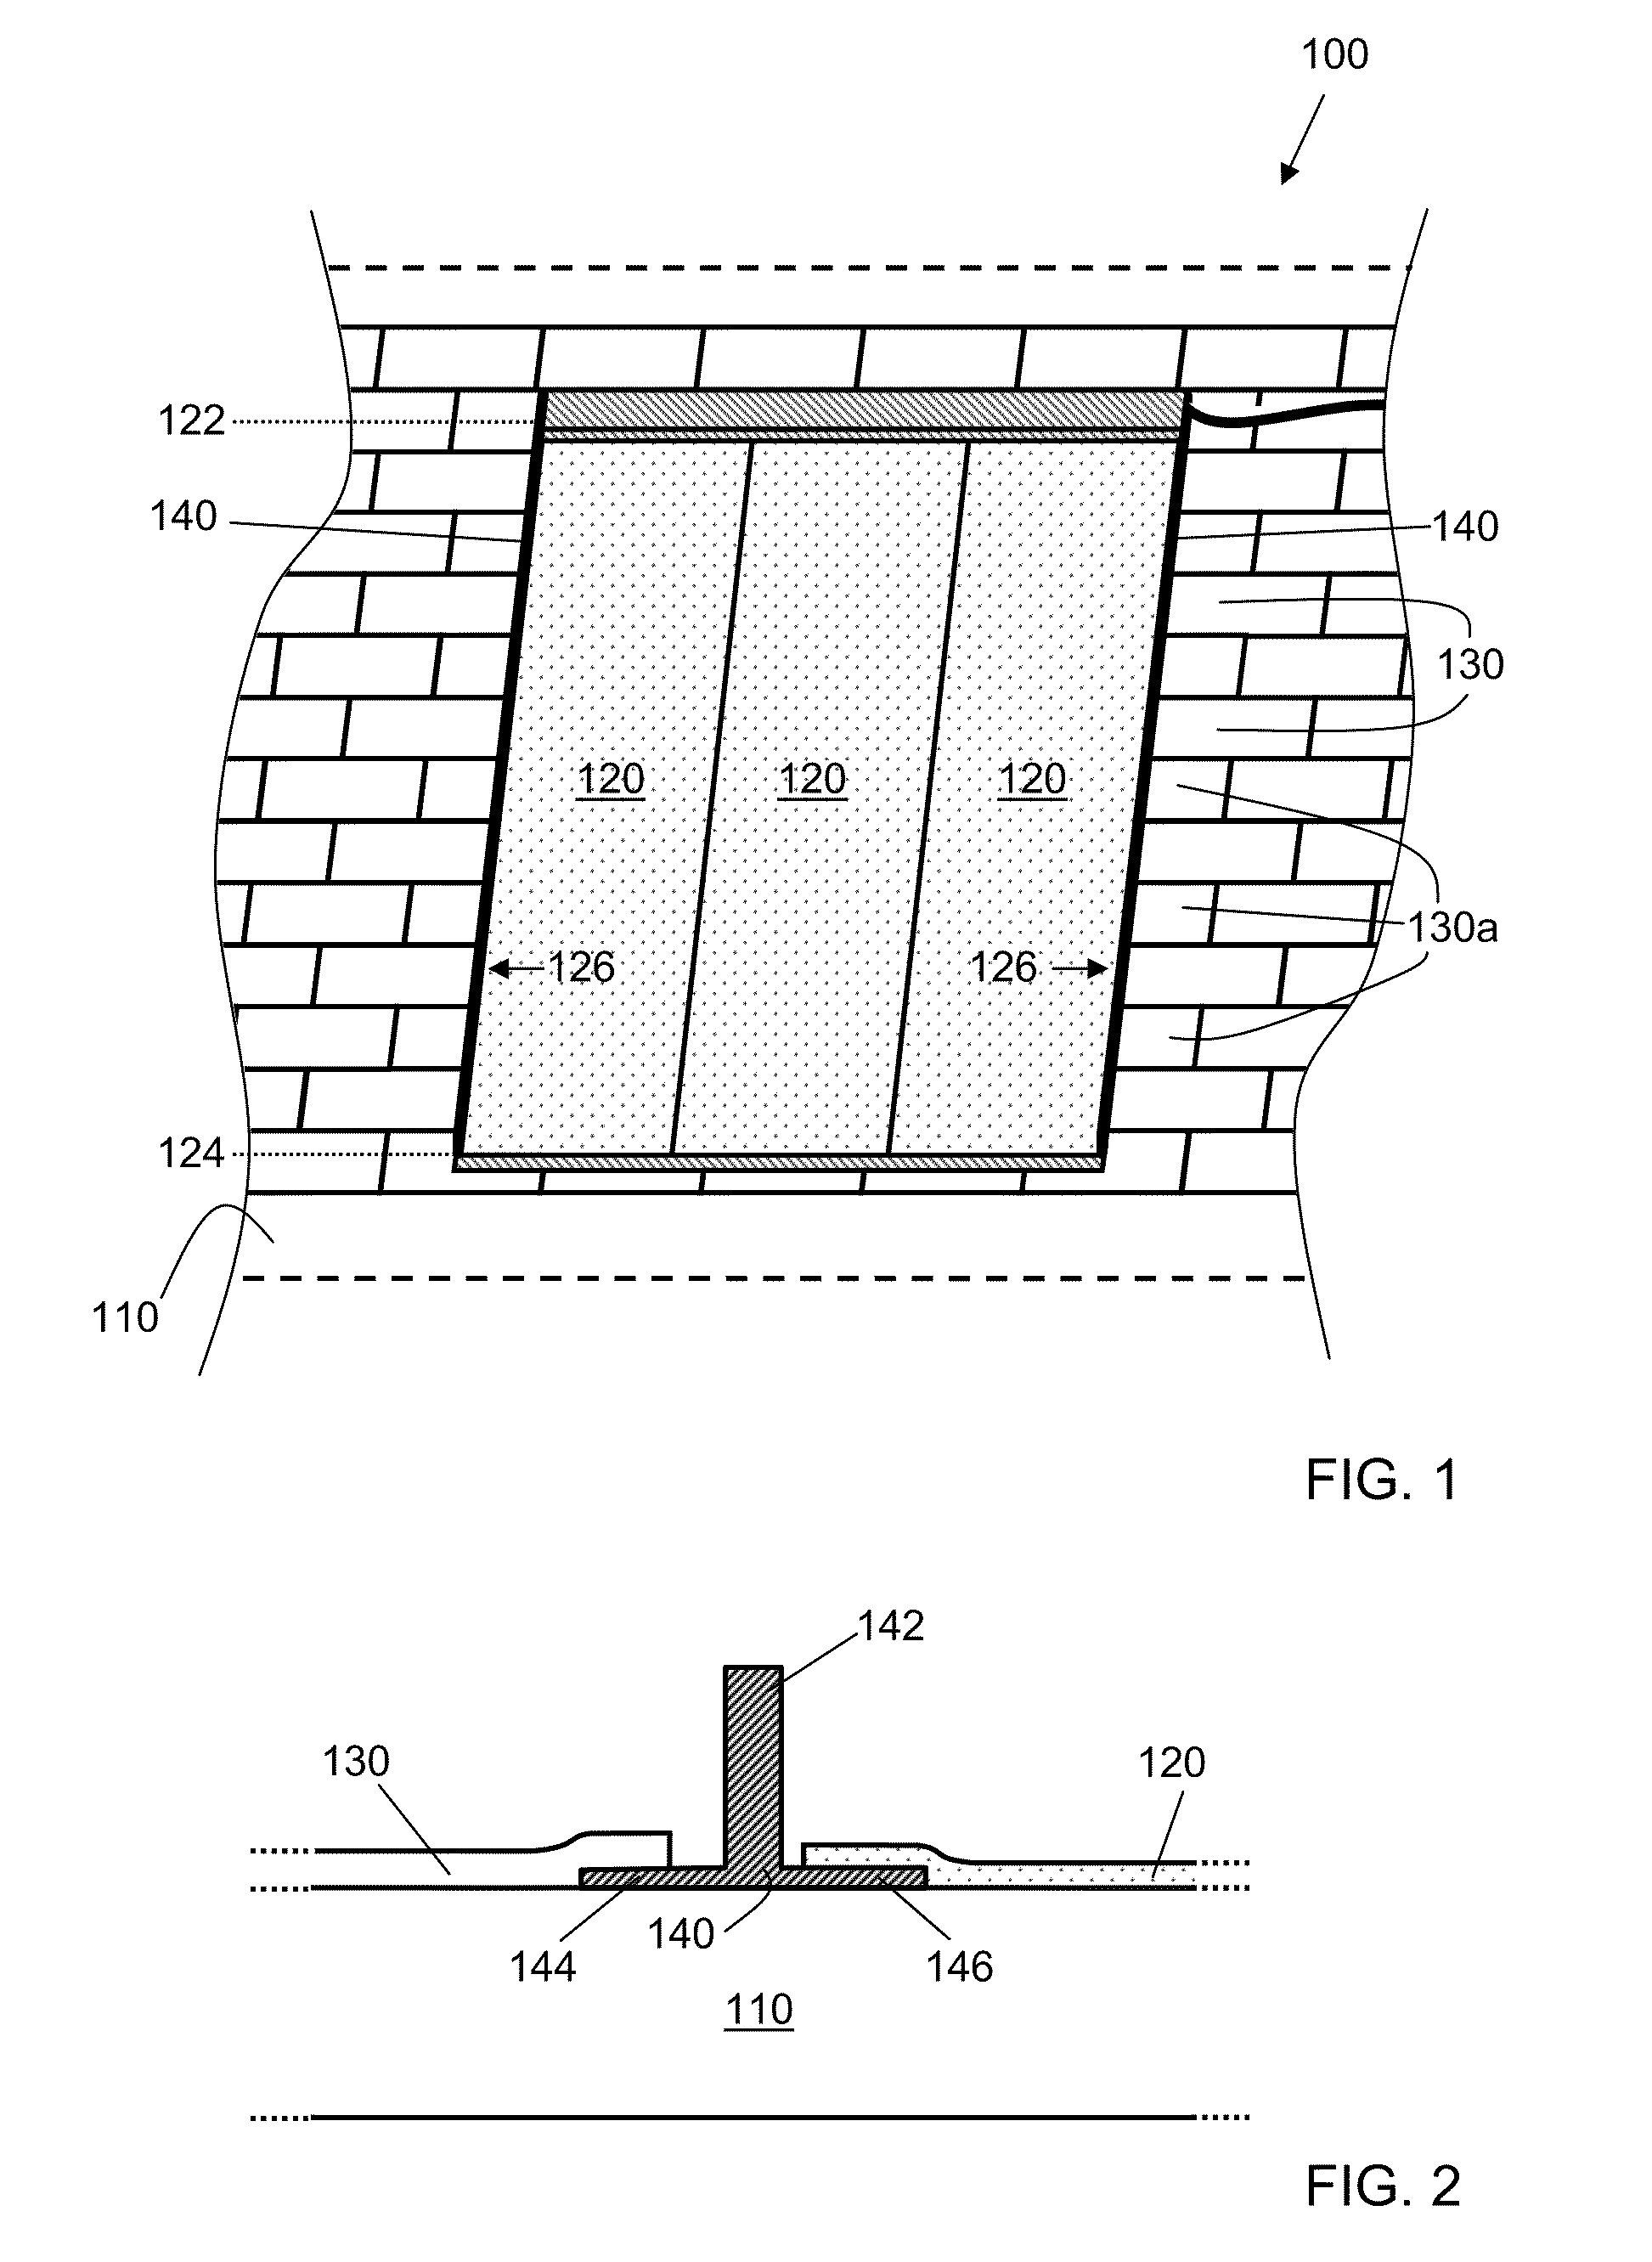 Photovoltaic systems, methods for installing photovoltaic systems, and kits for installing photovoltaic systems